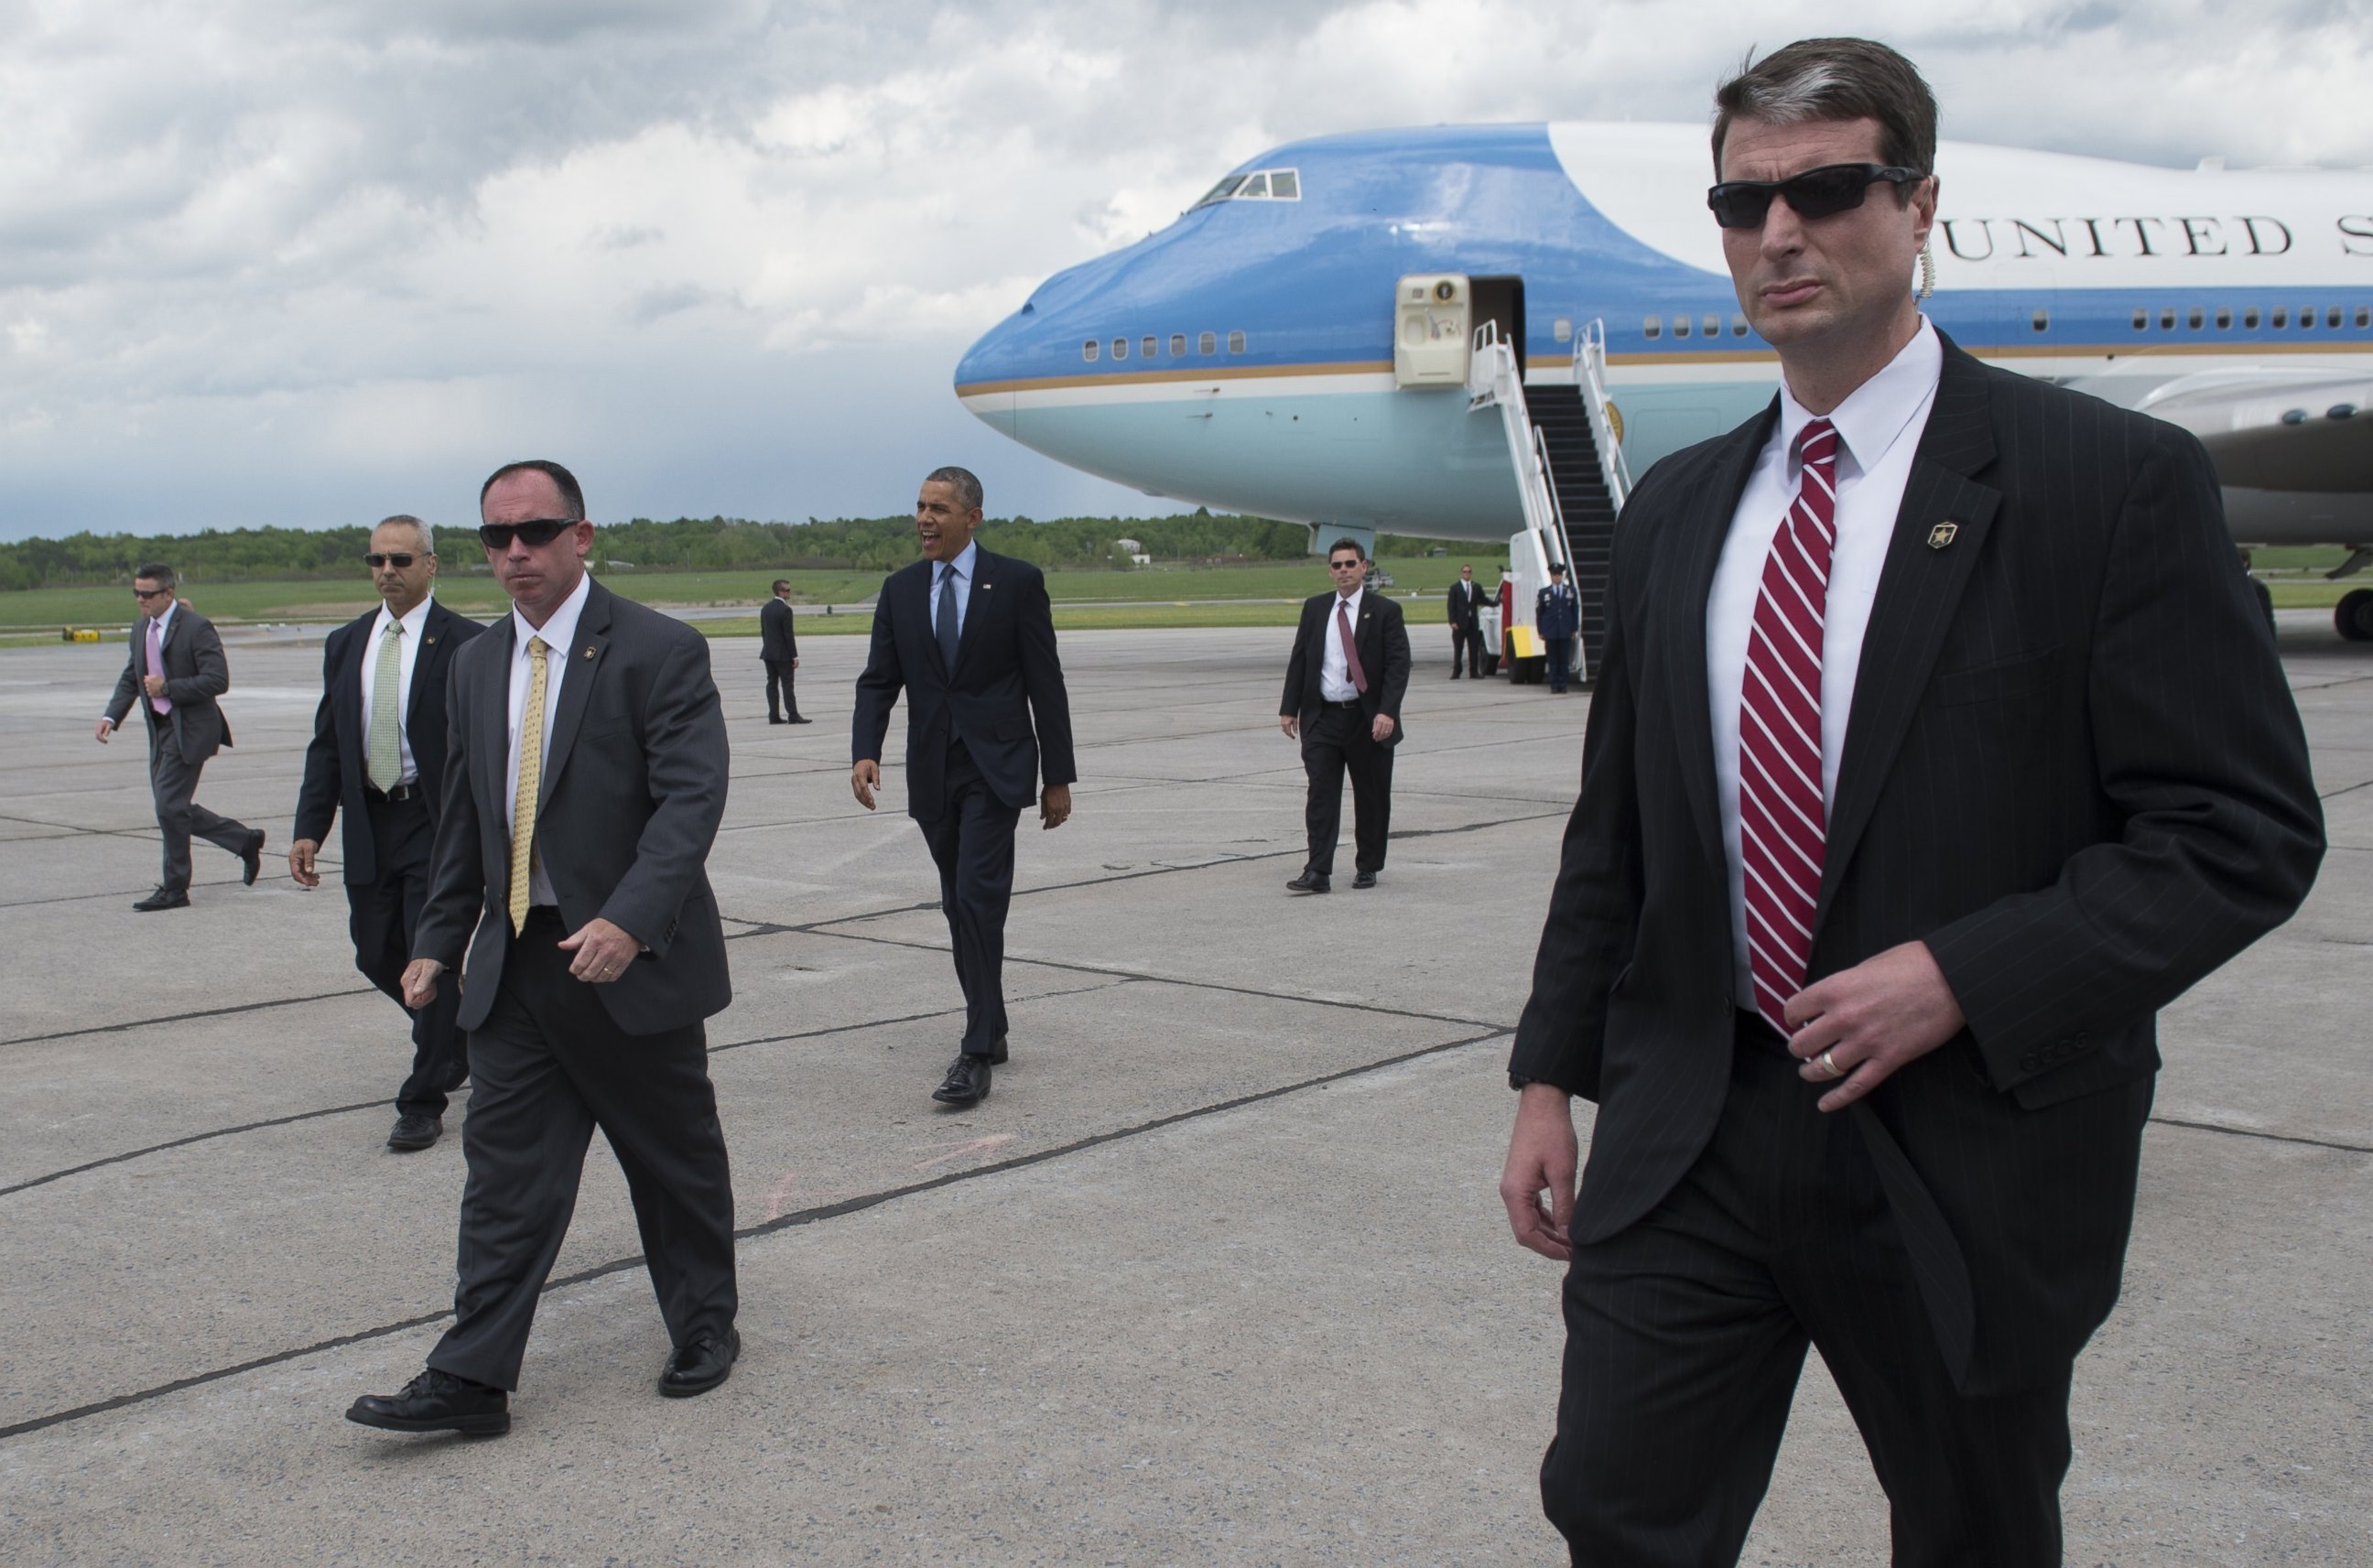 PHOTO: President Barack Obama, surrounded by US Secret Service agents, walks to greet guests after arriving on Air Force One at Griffiss International Airport in Rome, New York on May 22, 2014. 